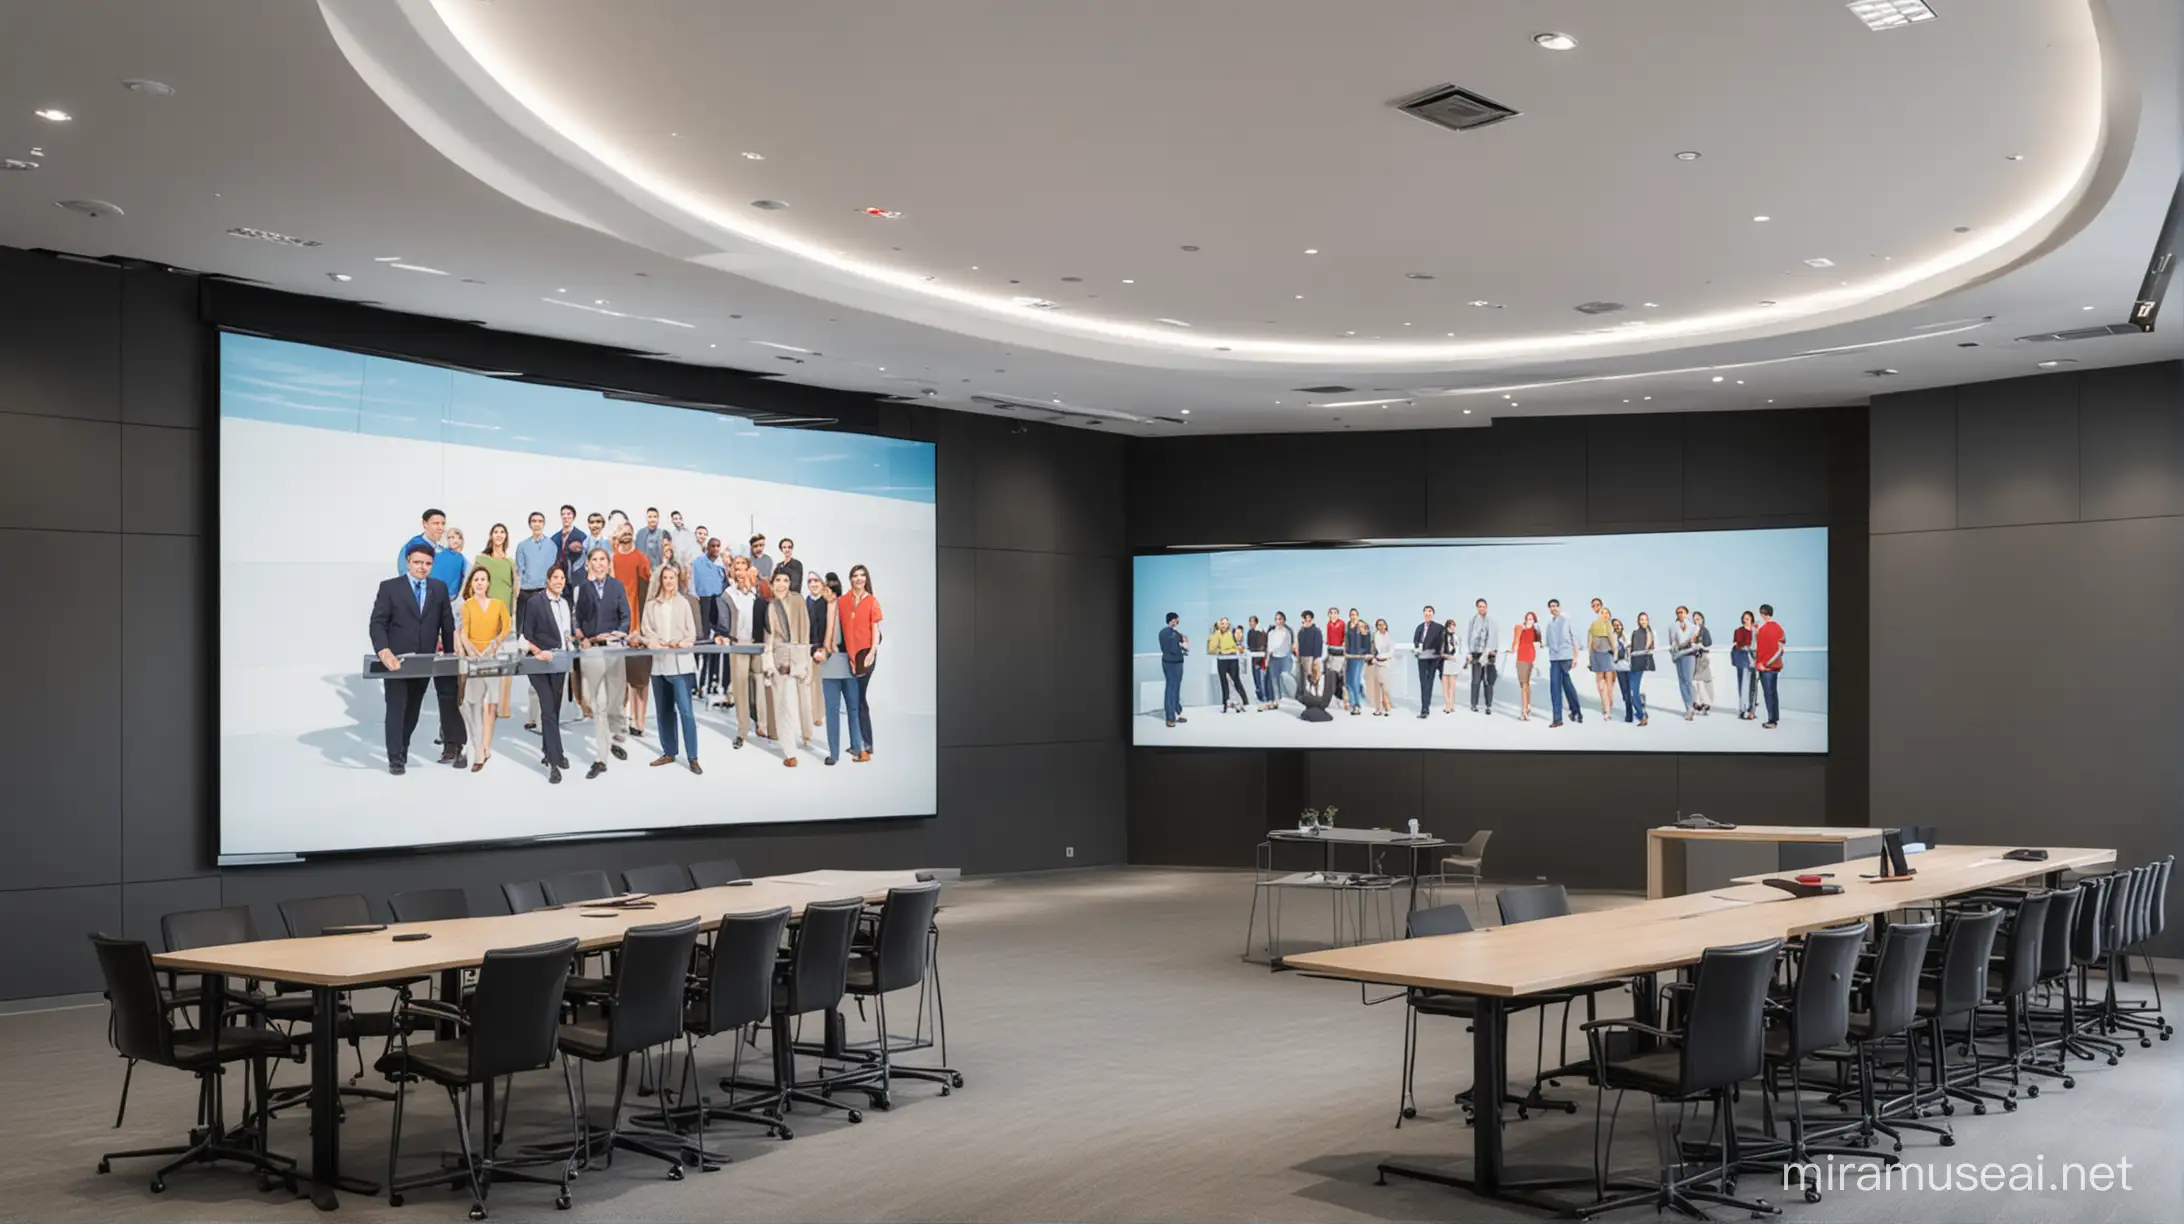 Corporate Presentation Room with Large Video Wall